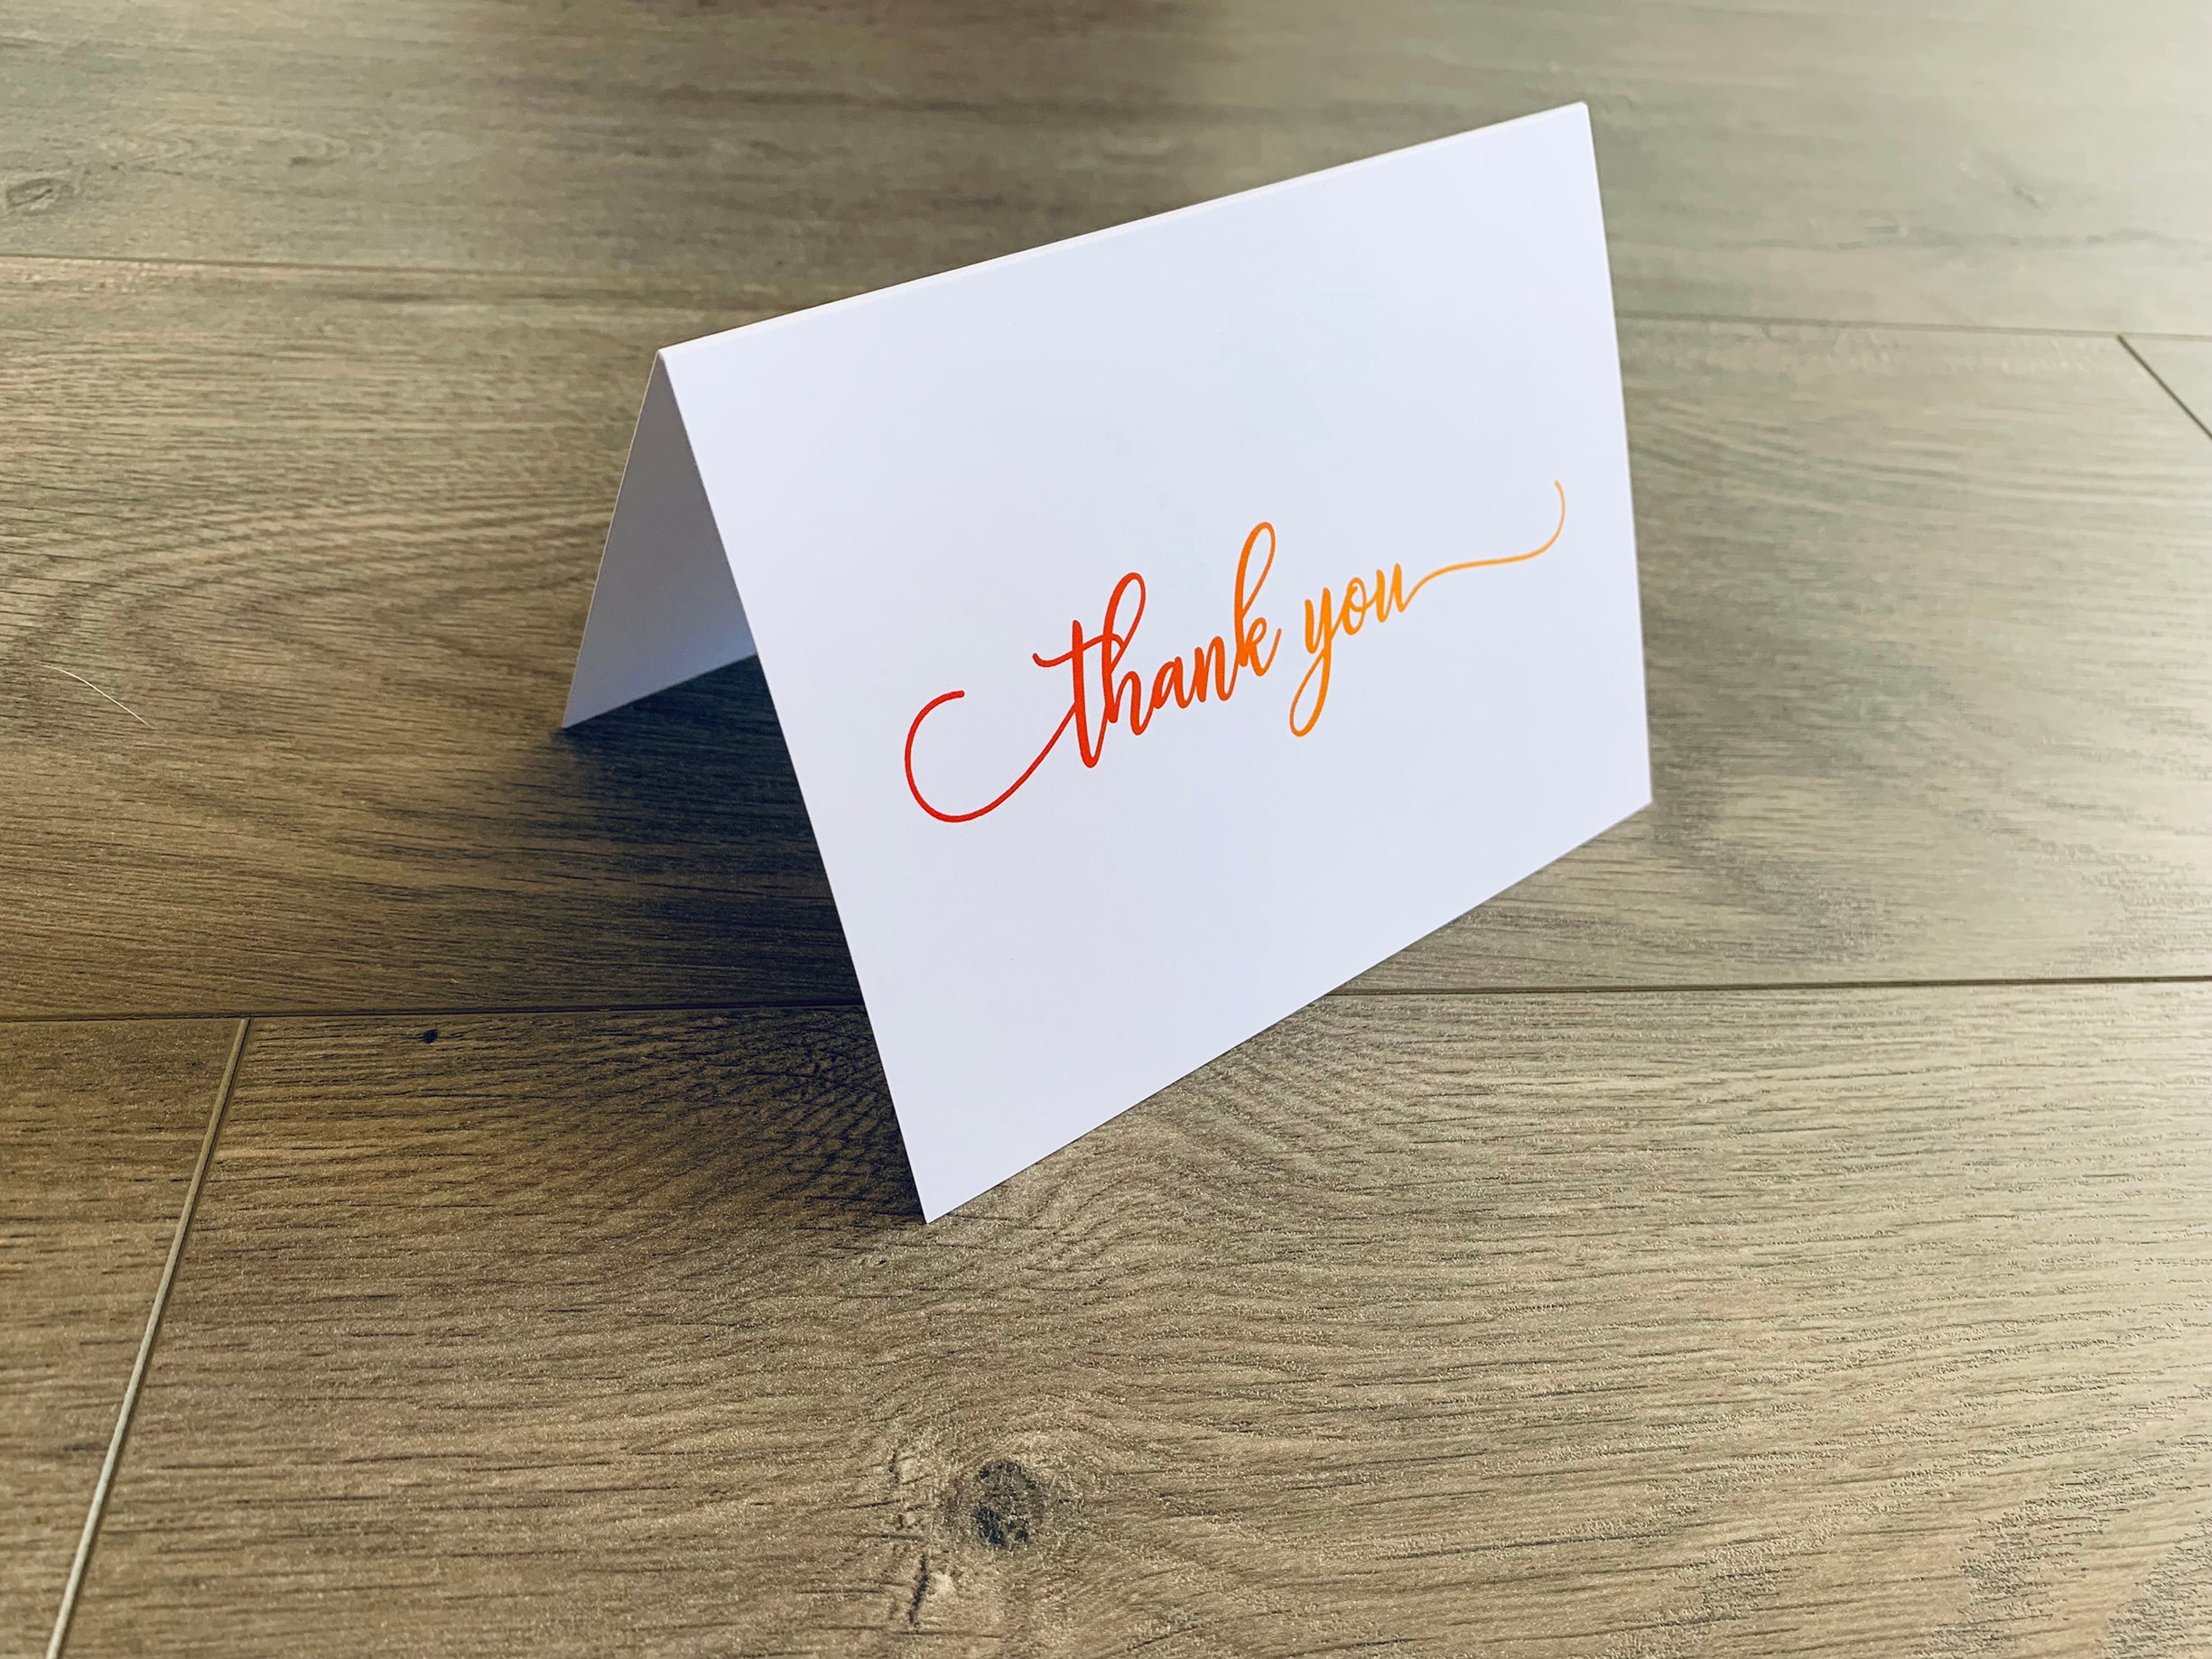 A white notecard with a script font that reads "thank you" on a wooden floor. The font fades from dark to light orange.